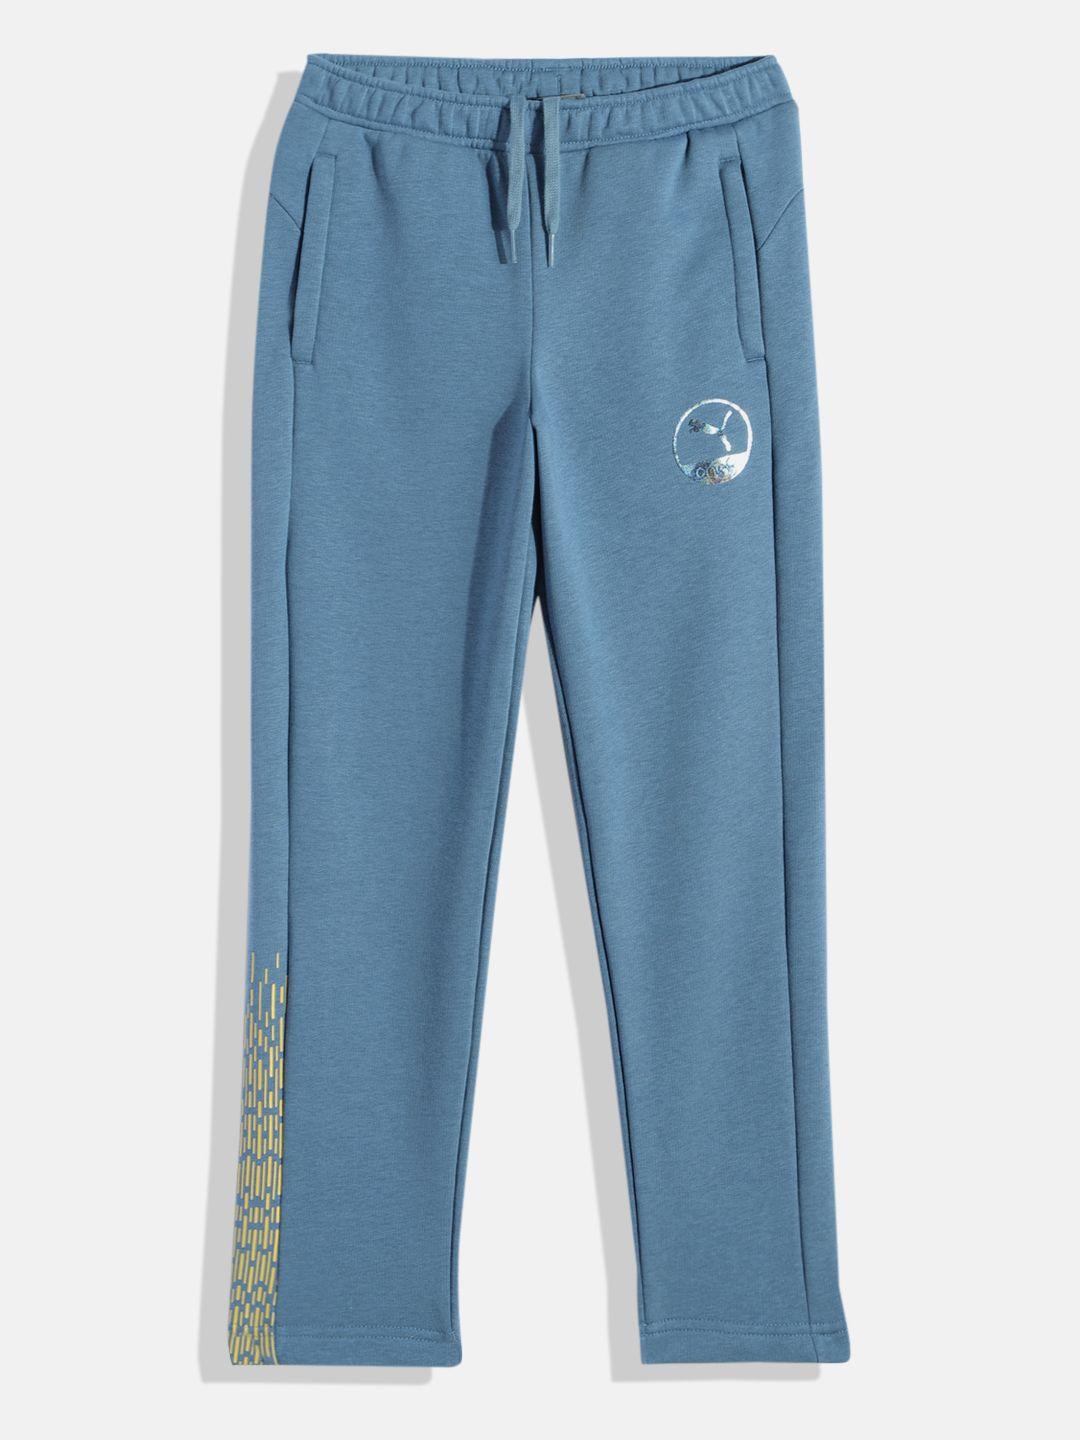 one8 x puma boys vk knitted track pants